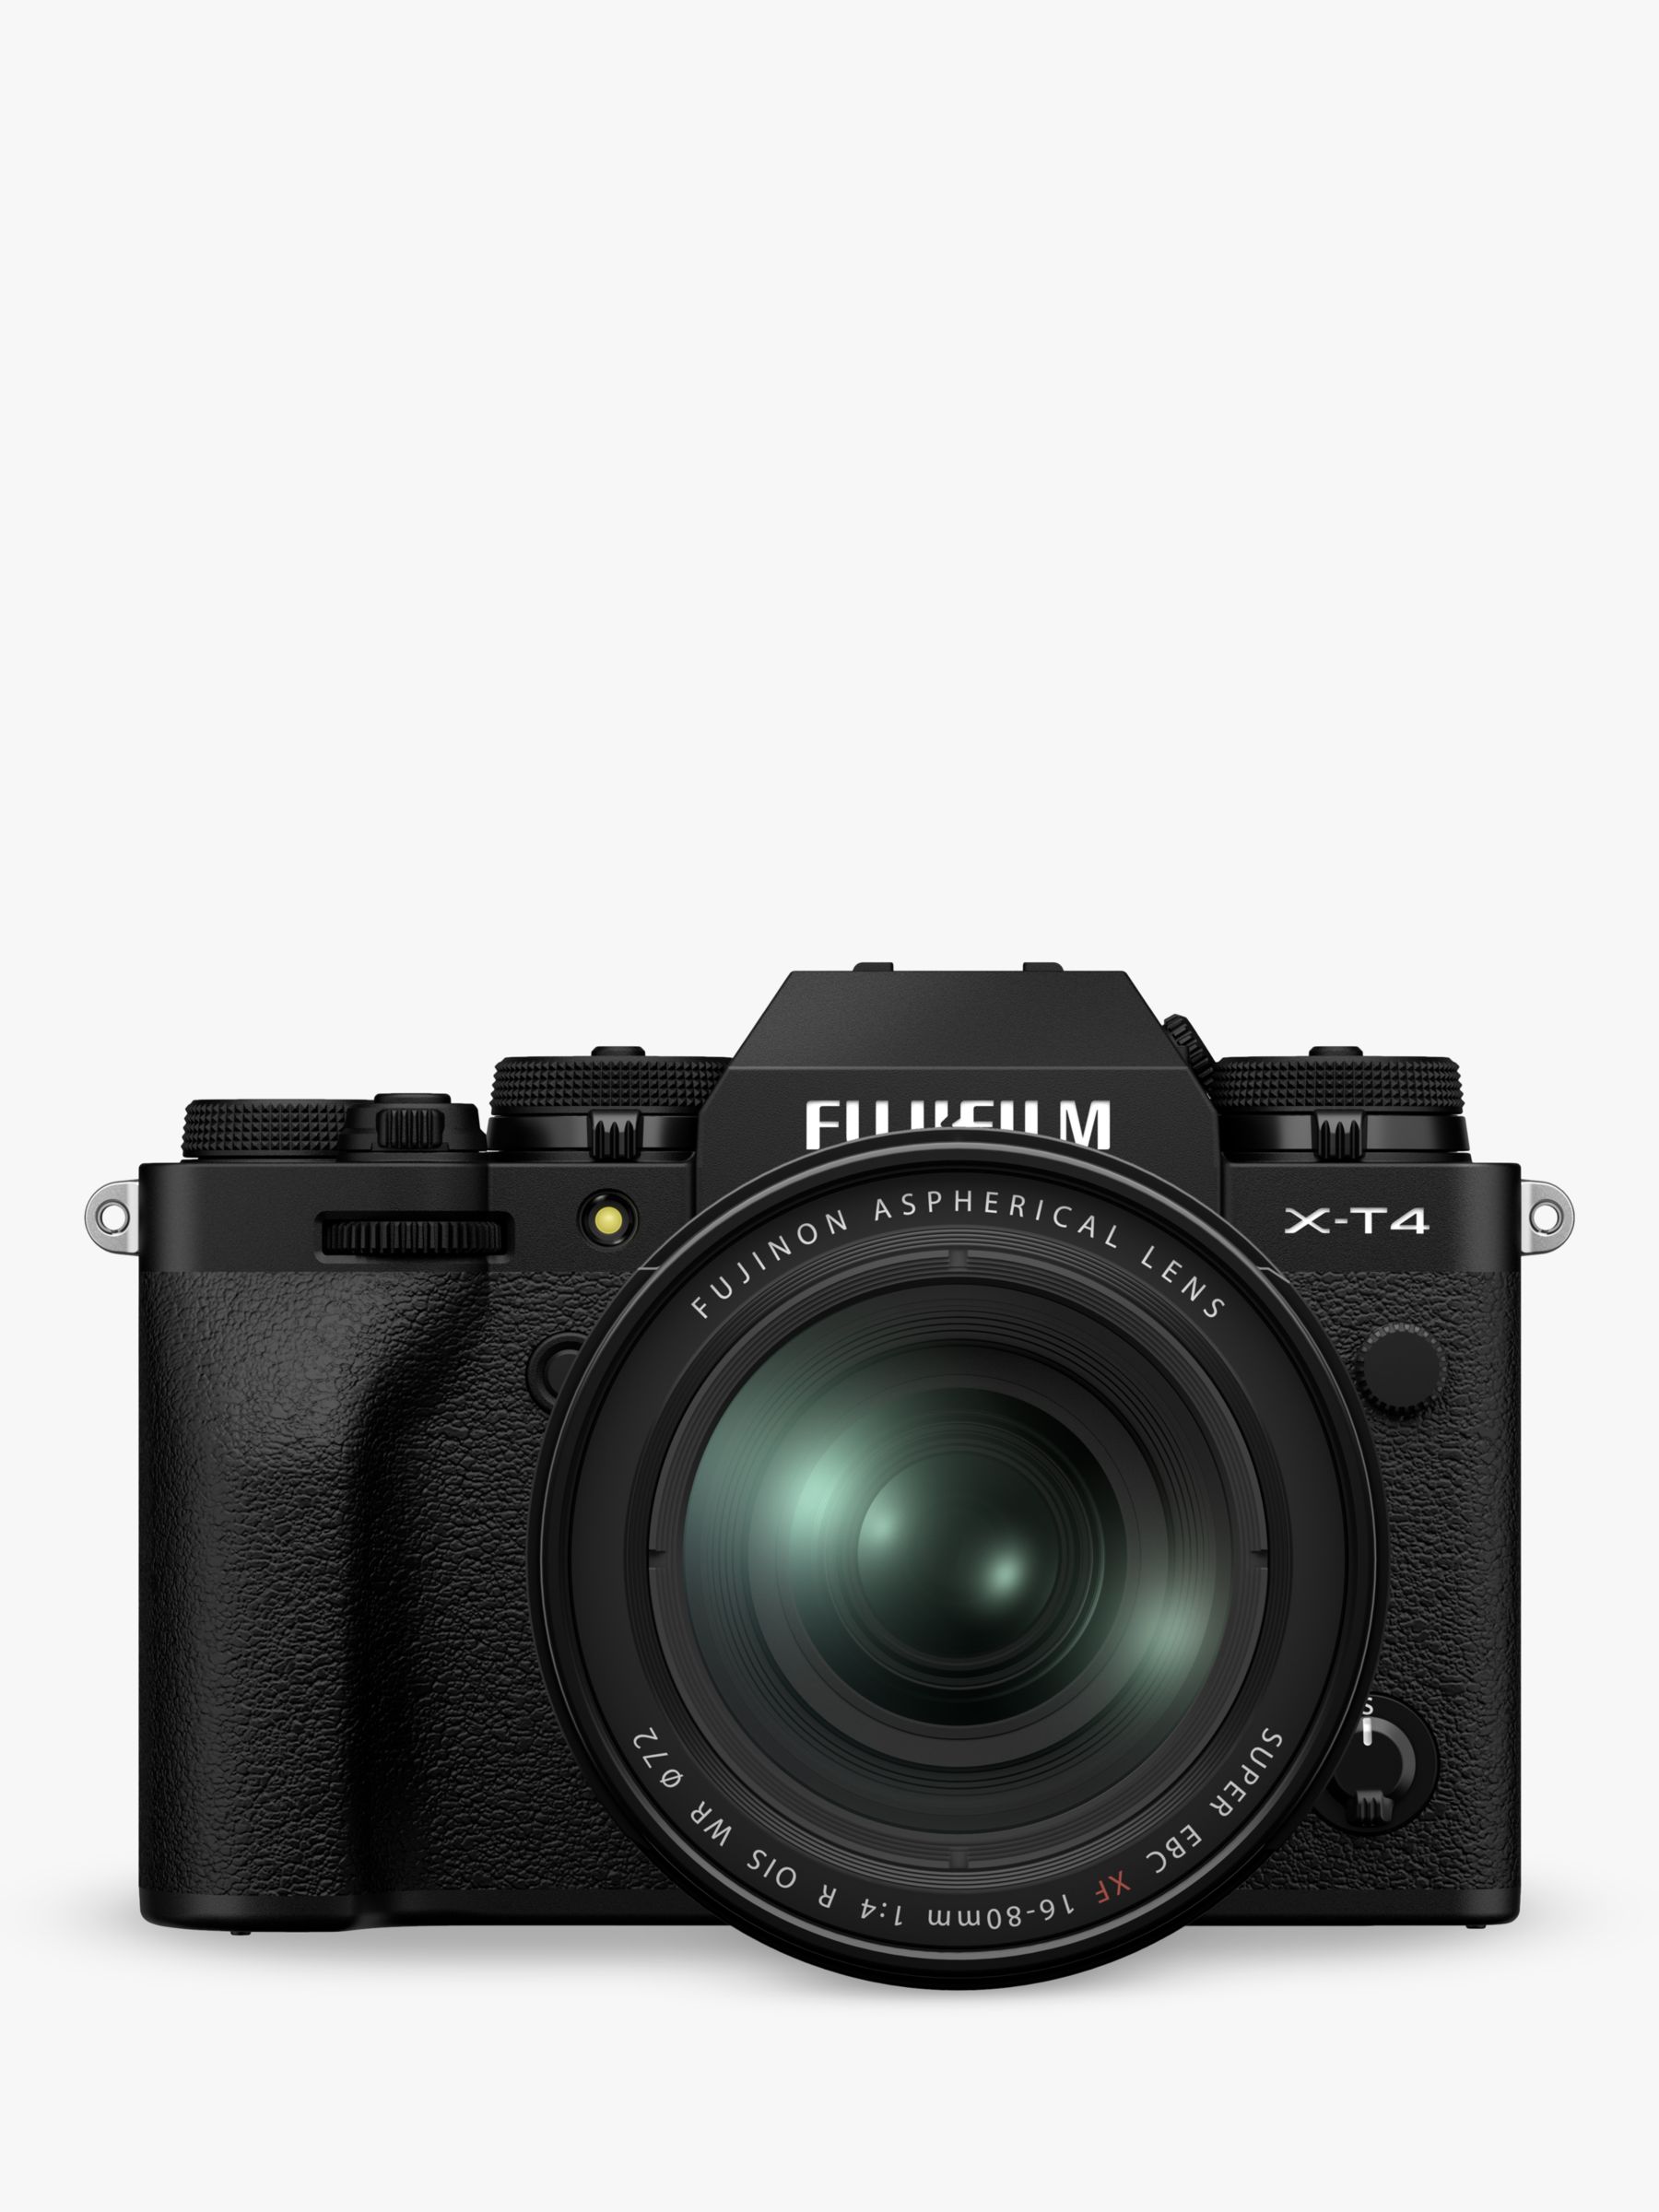 Image of Fujifilm XT4 Compact System Camera with XF 1680mm IS Lens 4K Ultra HD 261MP WiFi Bluetooth OLED EVF 3 LCD Touch Screen